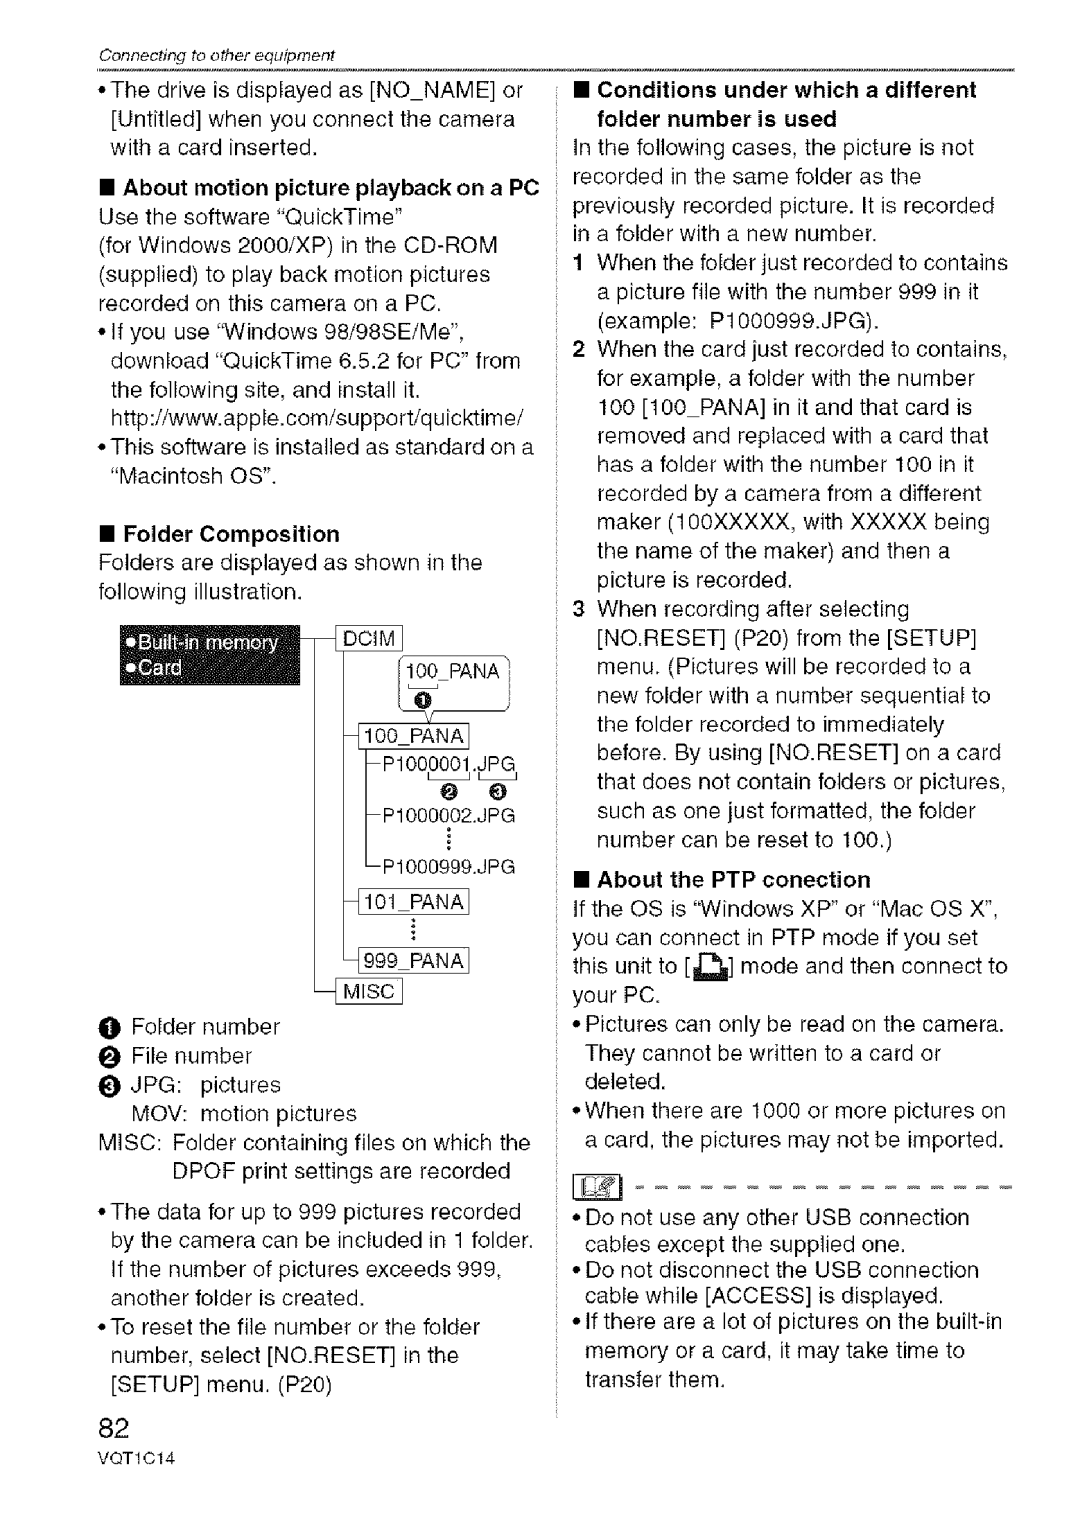 Panasonic DMC-FX12, DMC-FX10 operating instructions Conditions under which a different folder number is used 